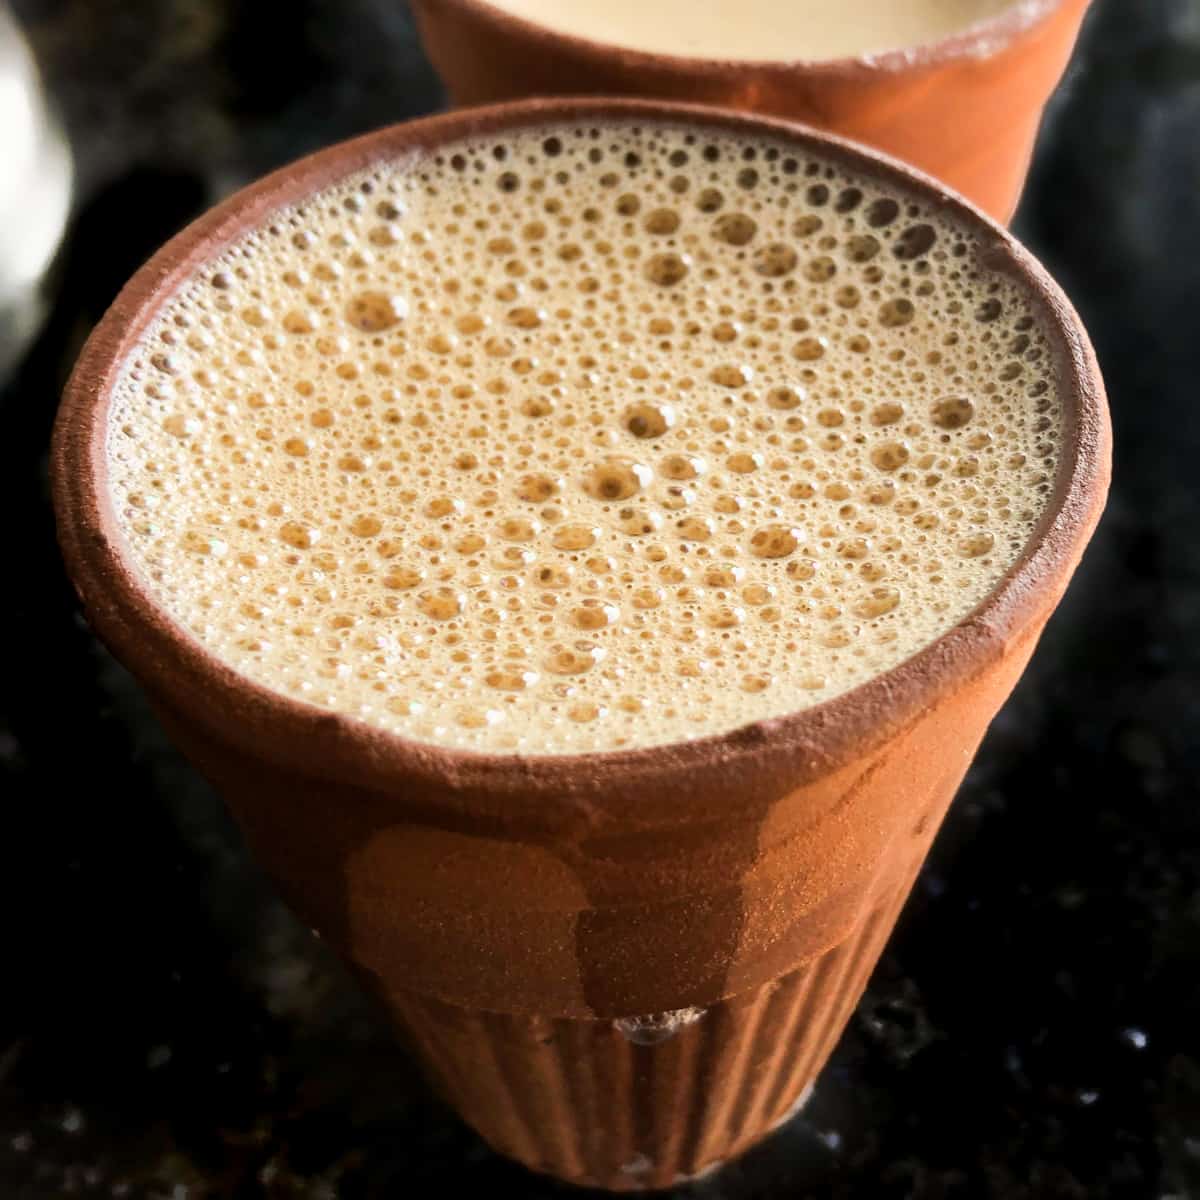 Hot, frothy, masala chai in an Indian clay cup.